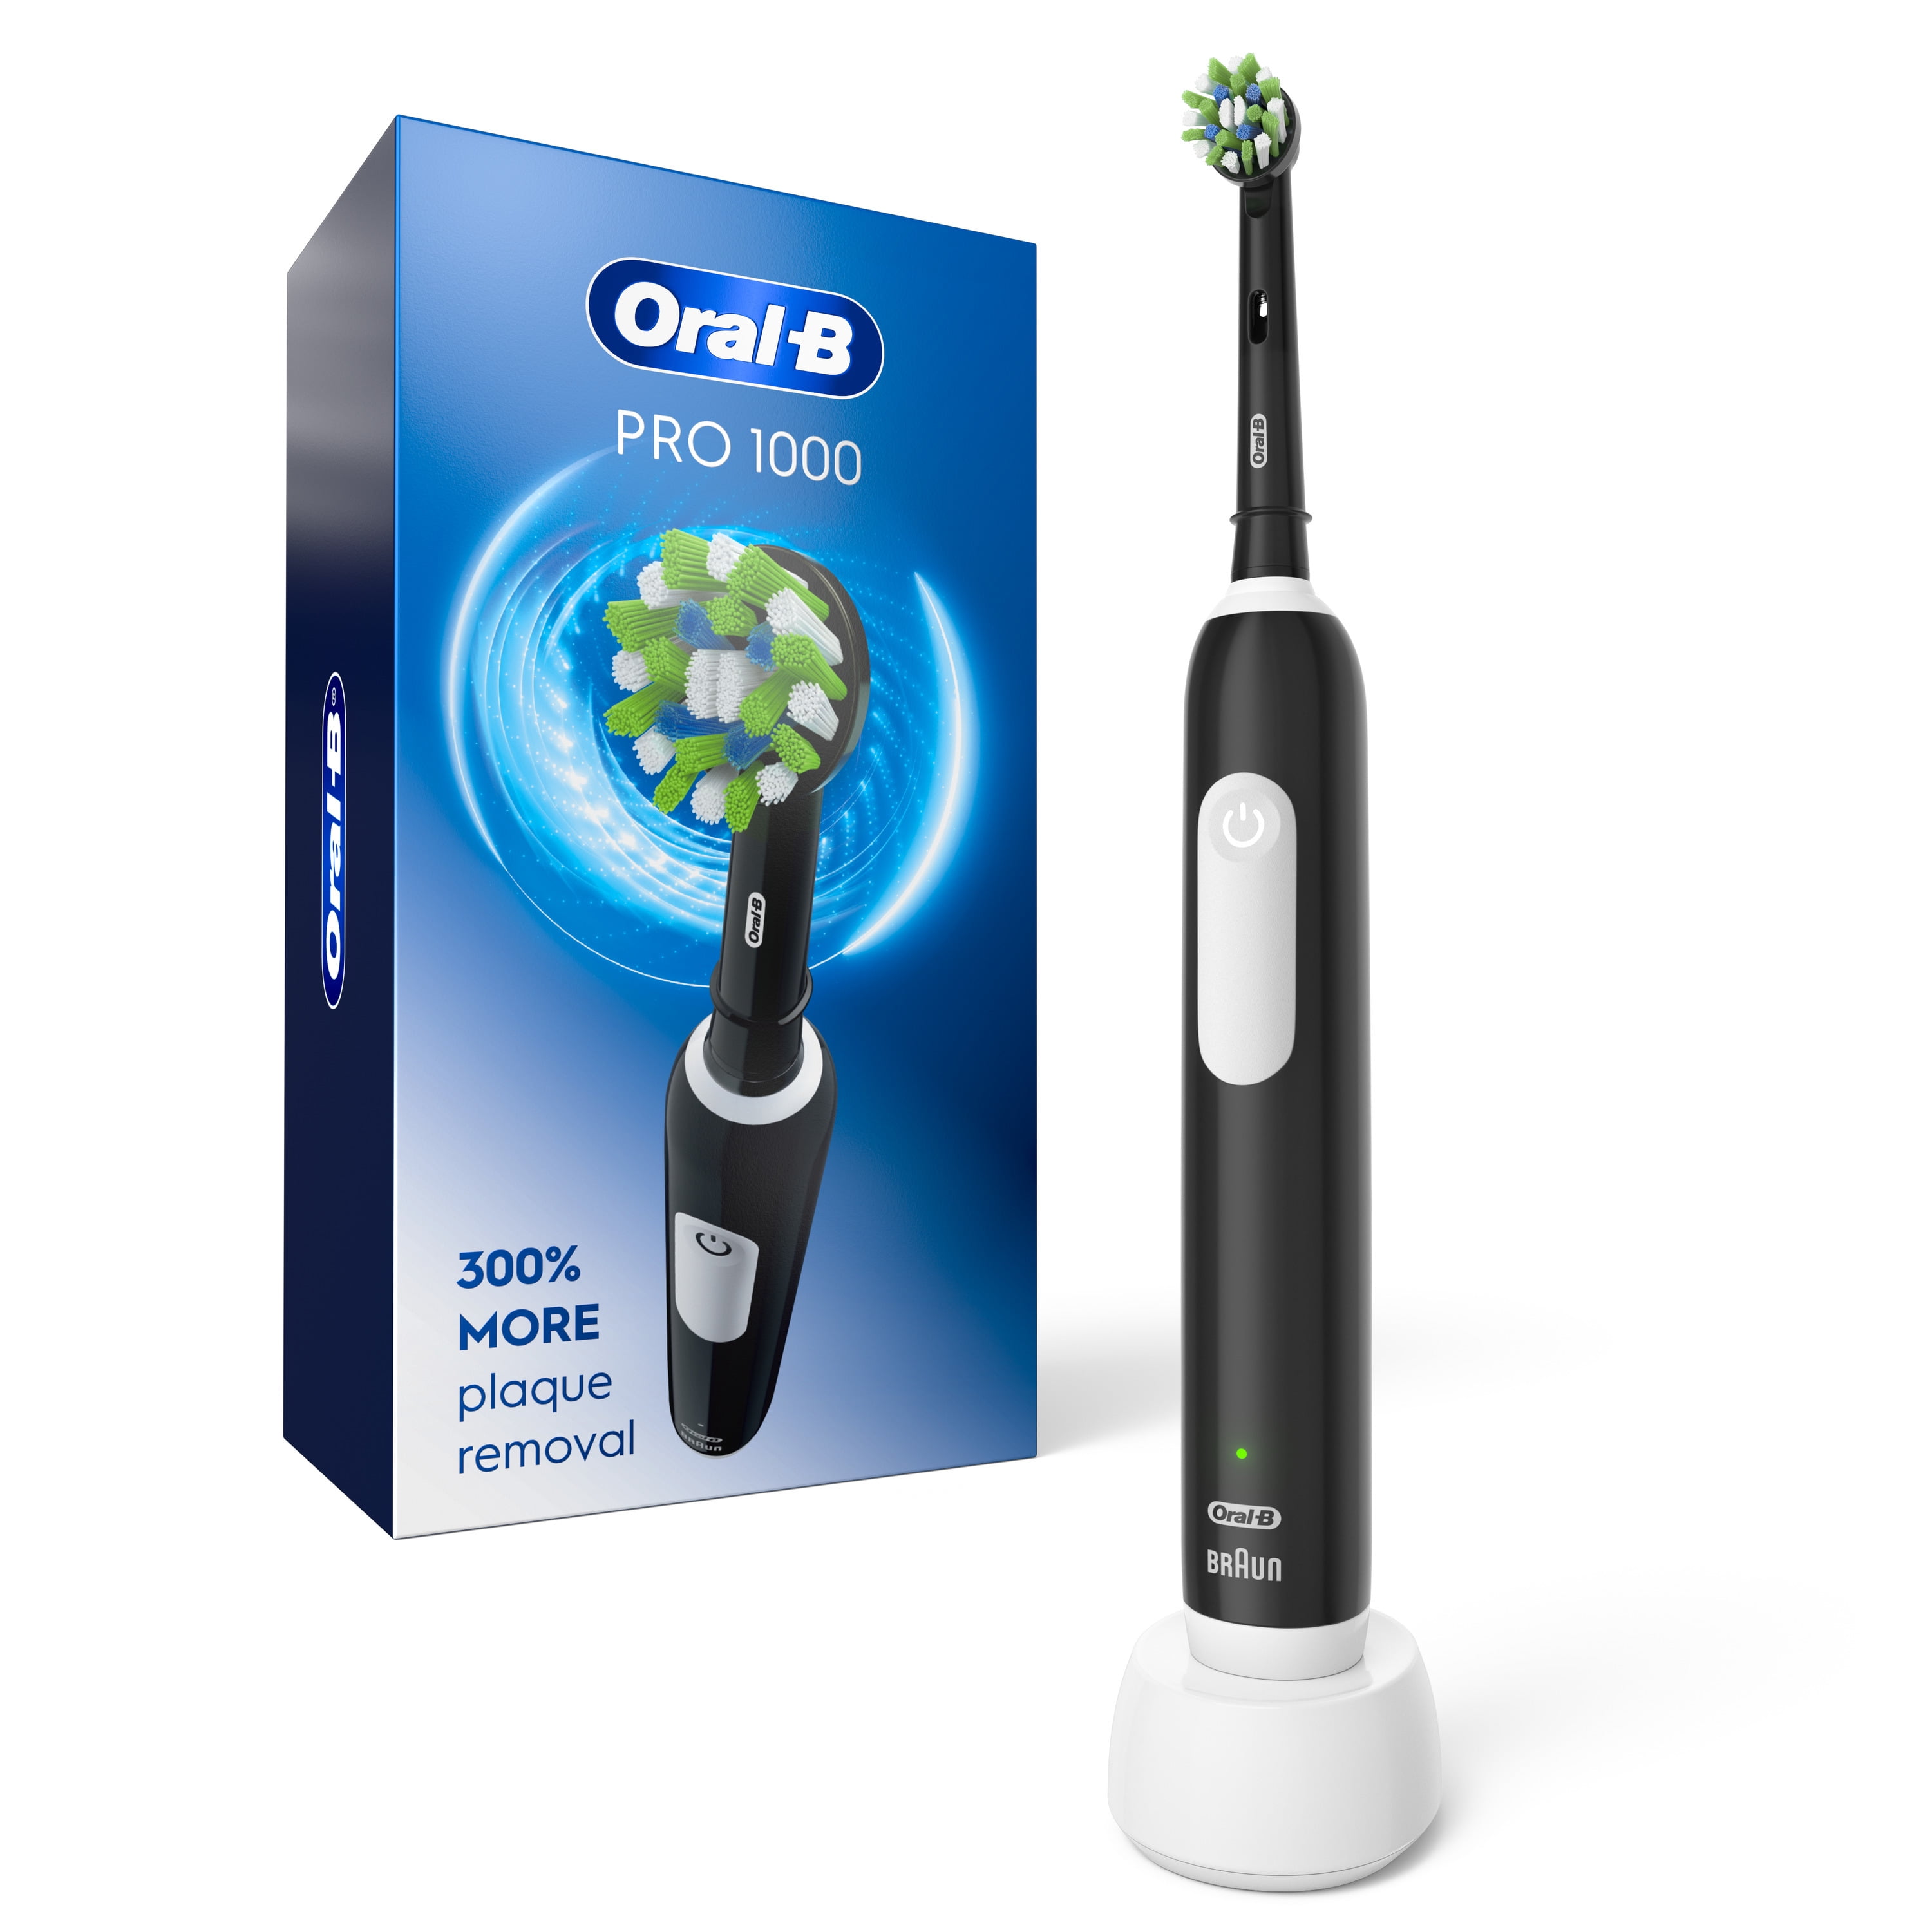 Oral-B 1000 Electric Toothbrush with (1) Brush Head, Rechargeable, Black - Walmart.com